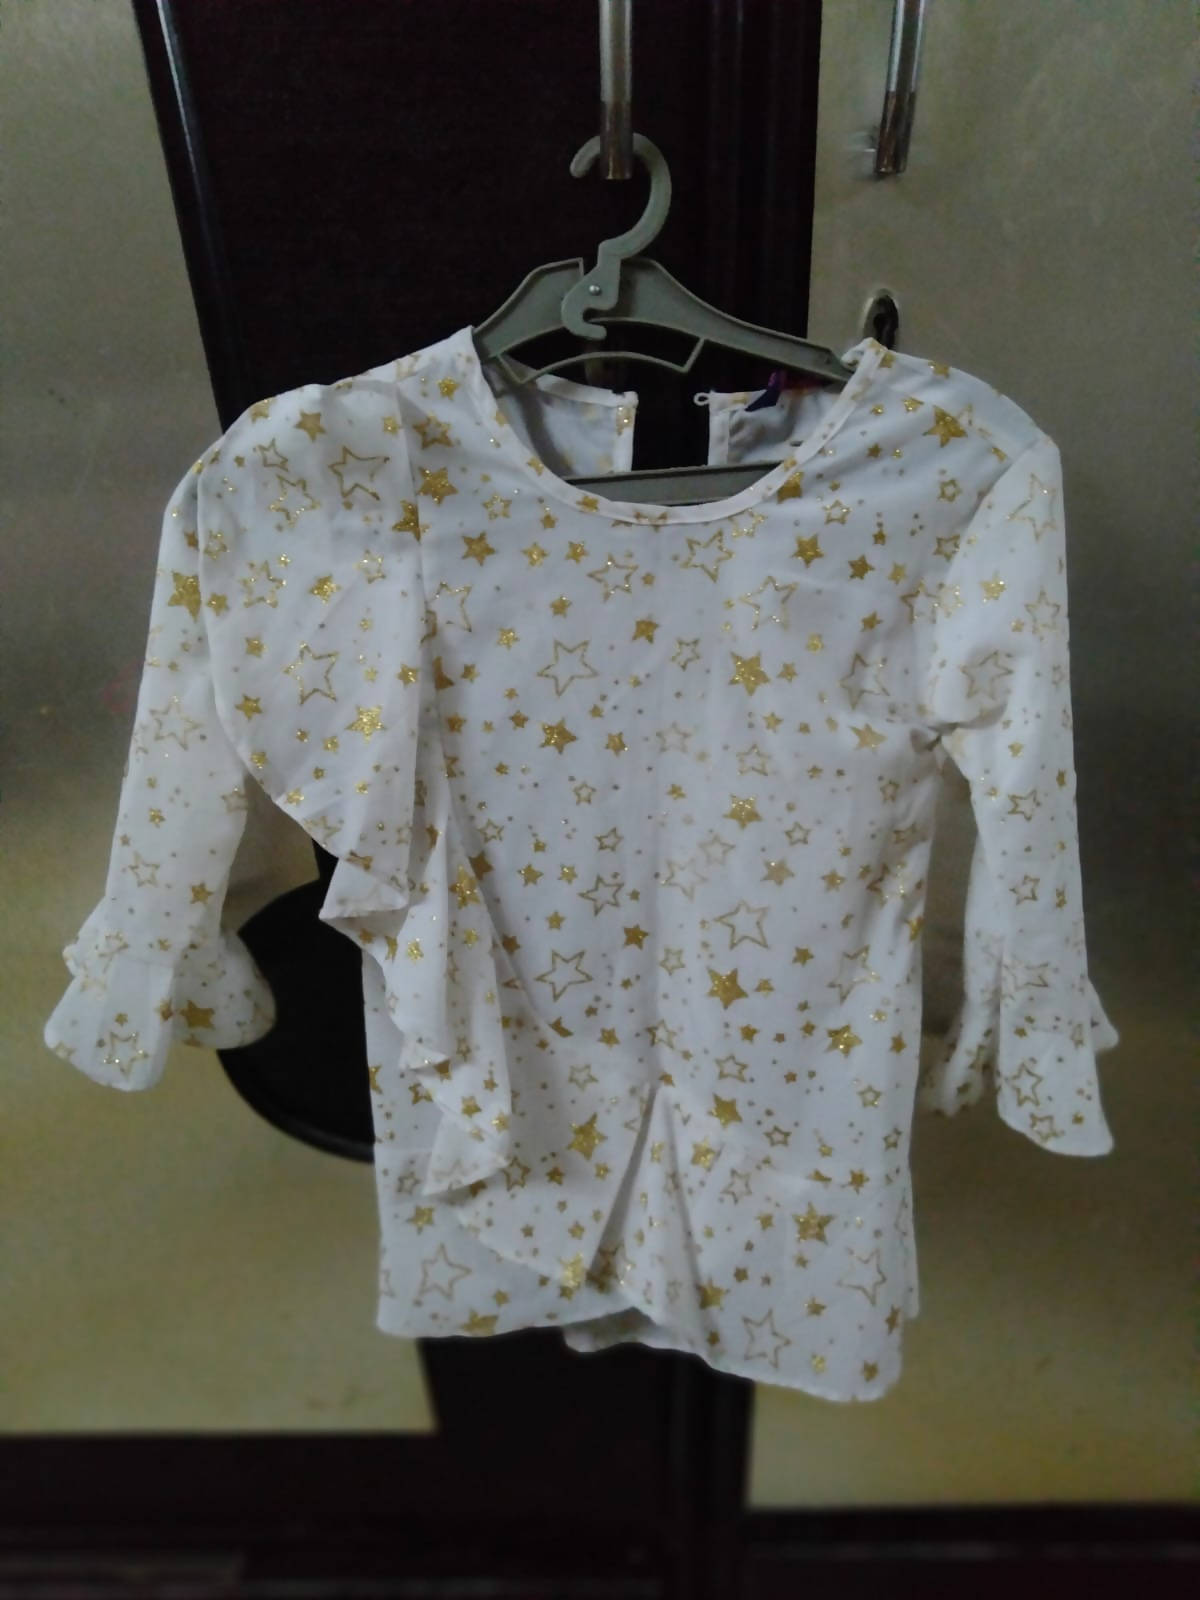 Party Wear Girls Top For 7-8 Years Girl